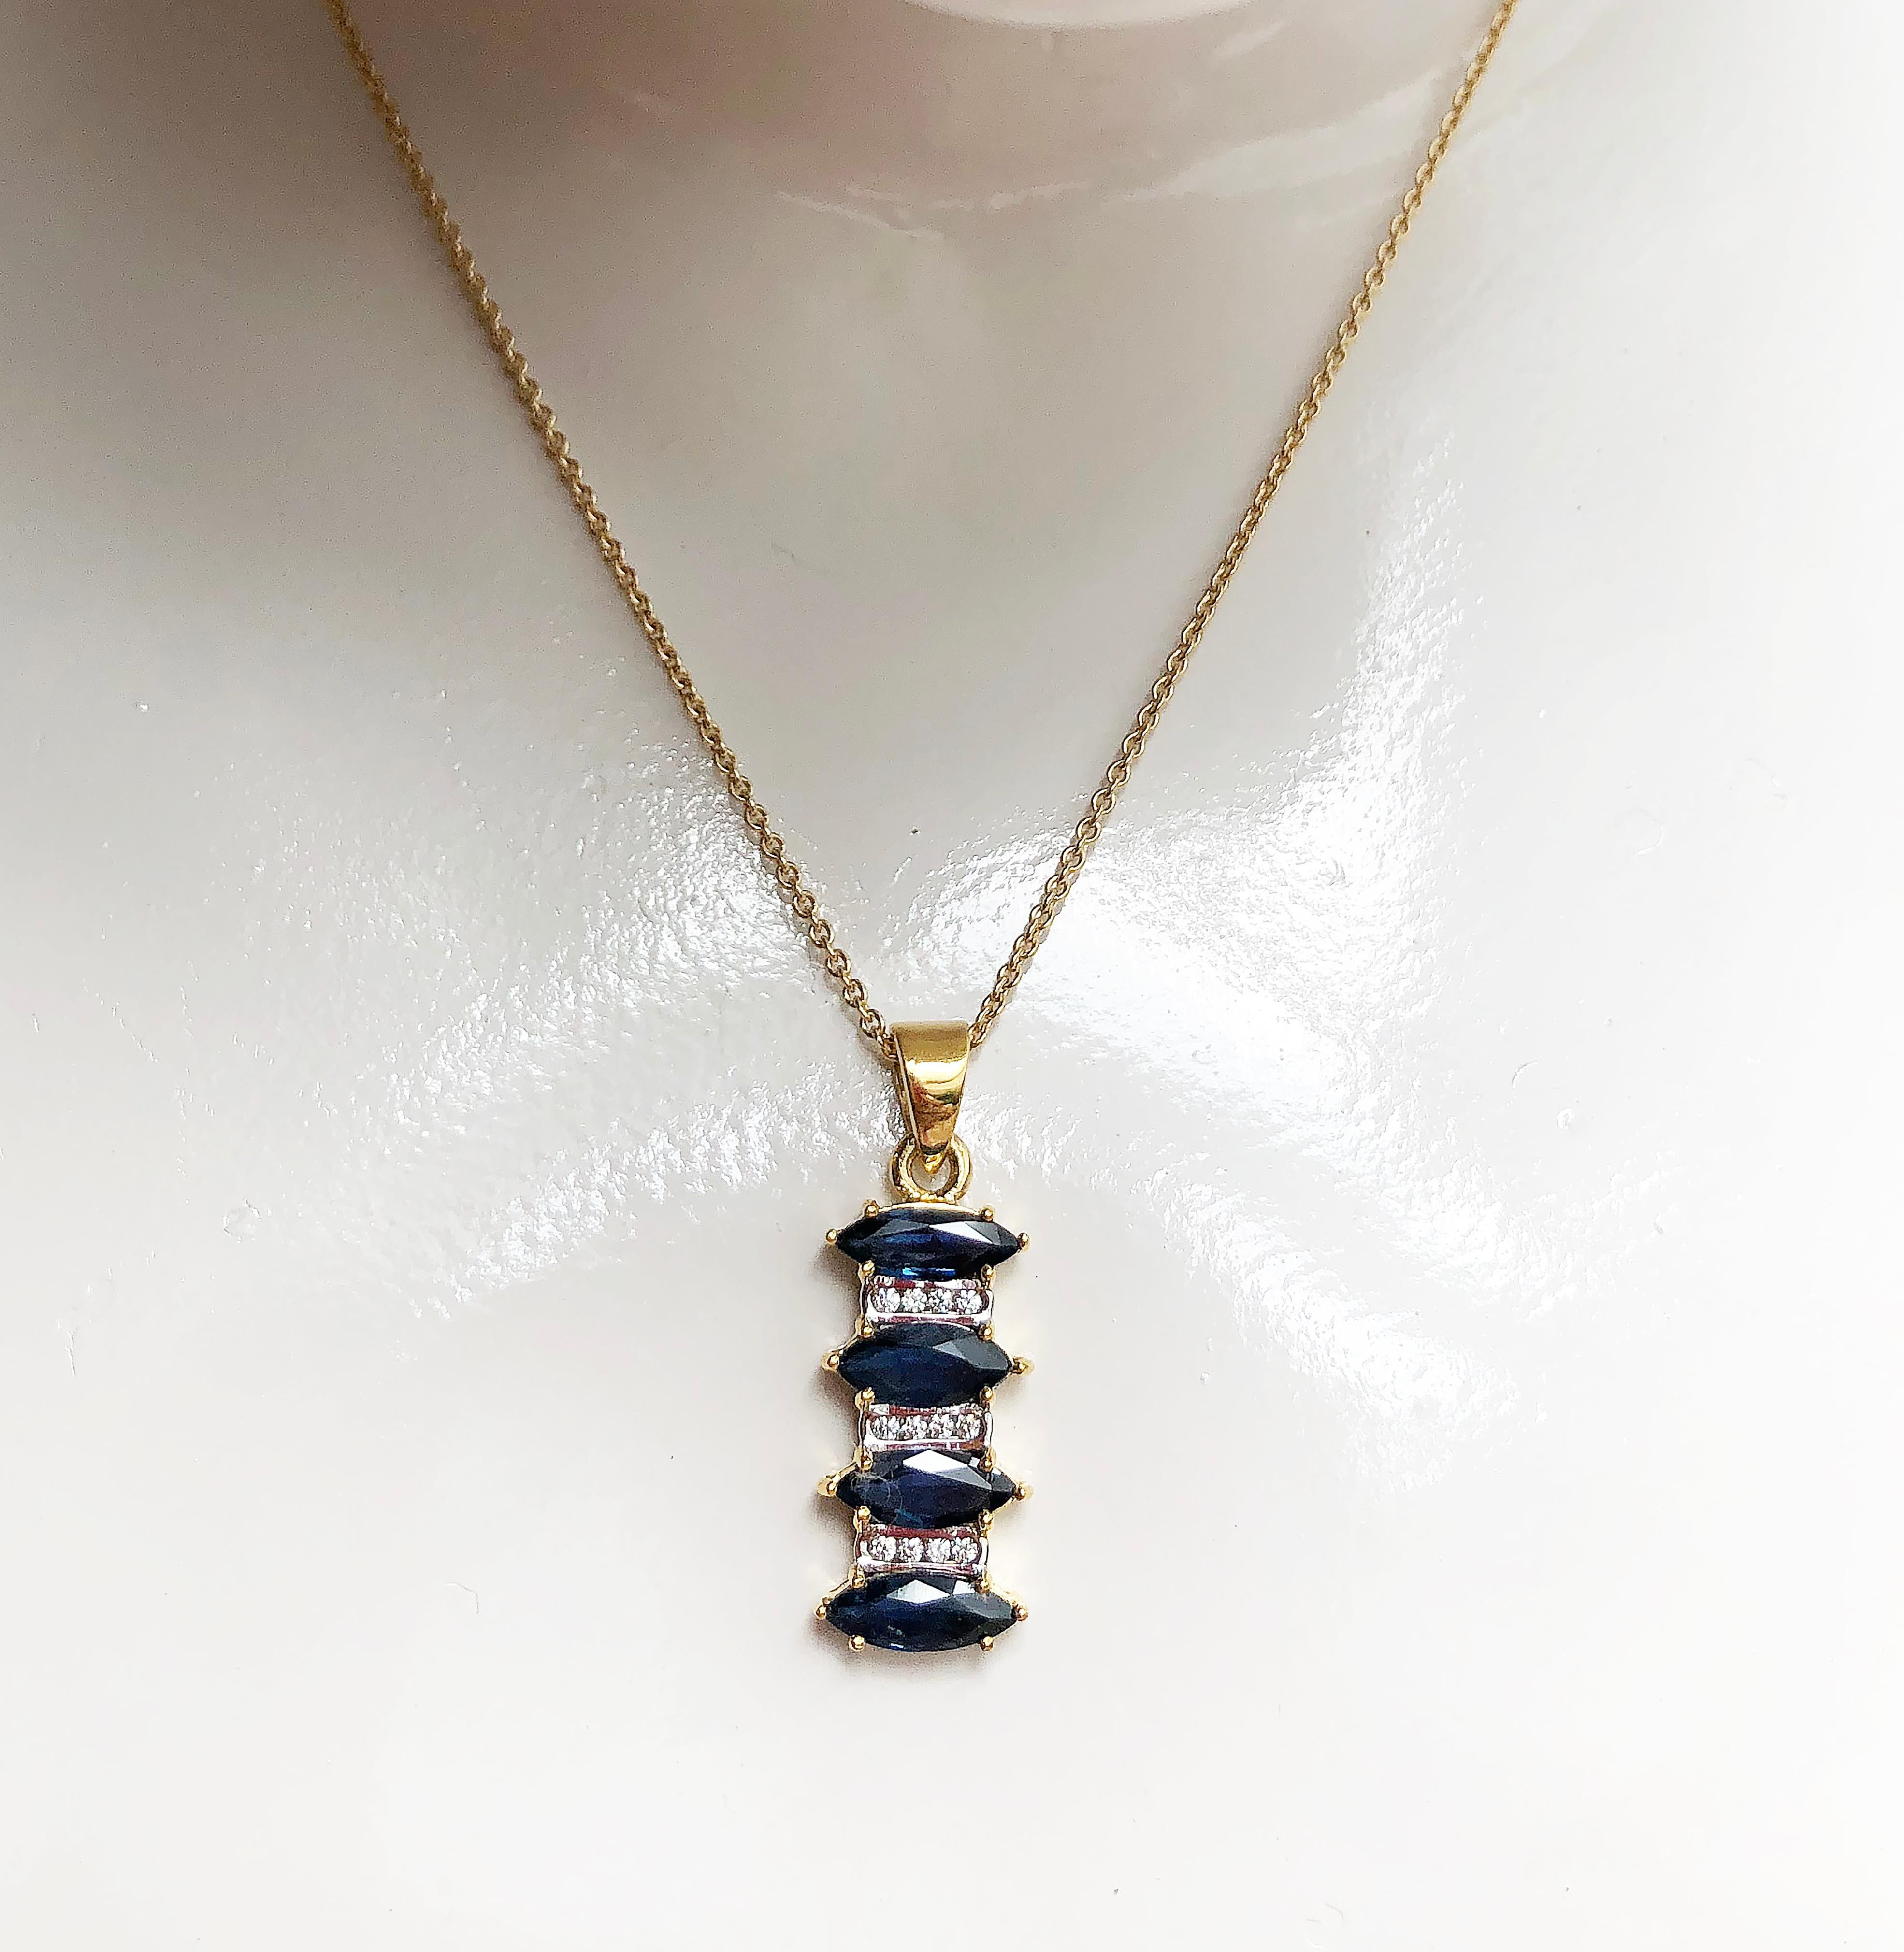 Blue Sapphire 2.93 carats with Diamond 0.13 carat Pendant set in 18 Karat Gold Settings
(chain not included)

Width: 1.1 cm
Length: 3.0 cm 

